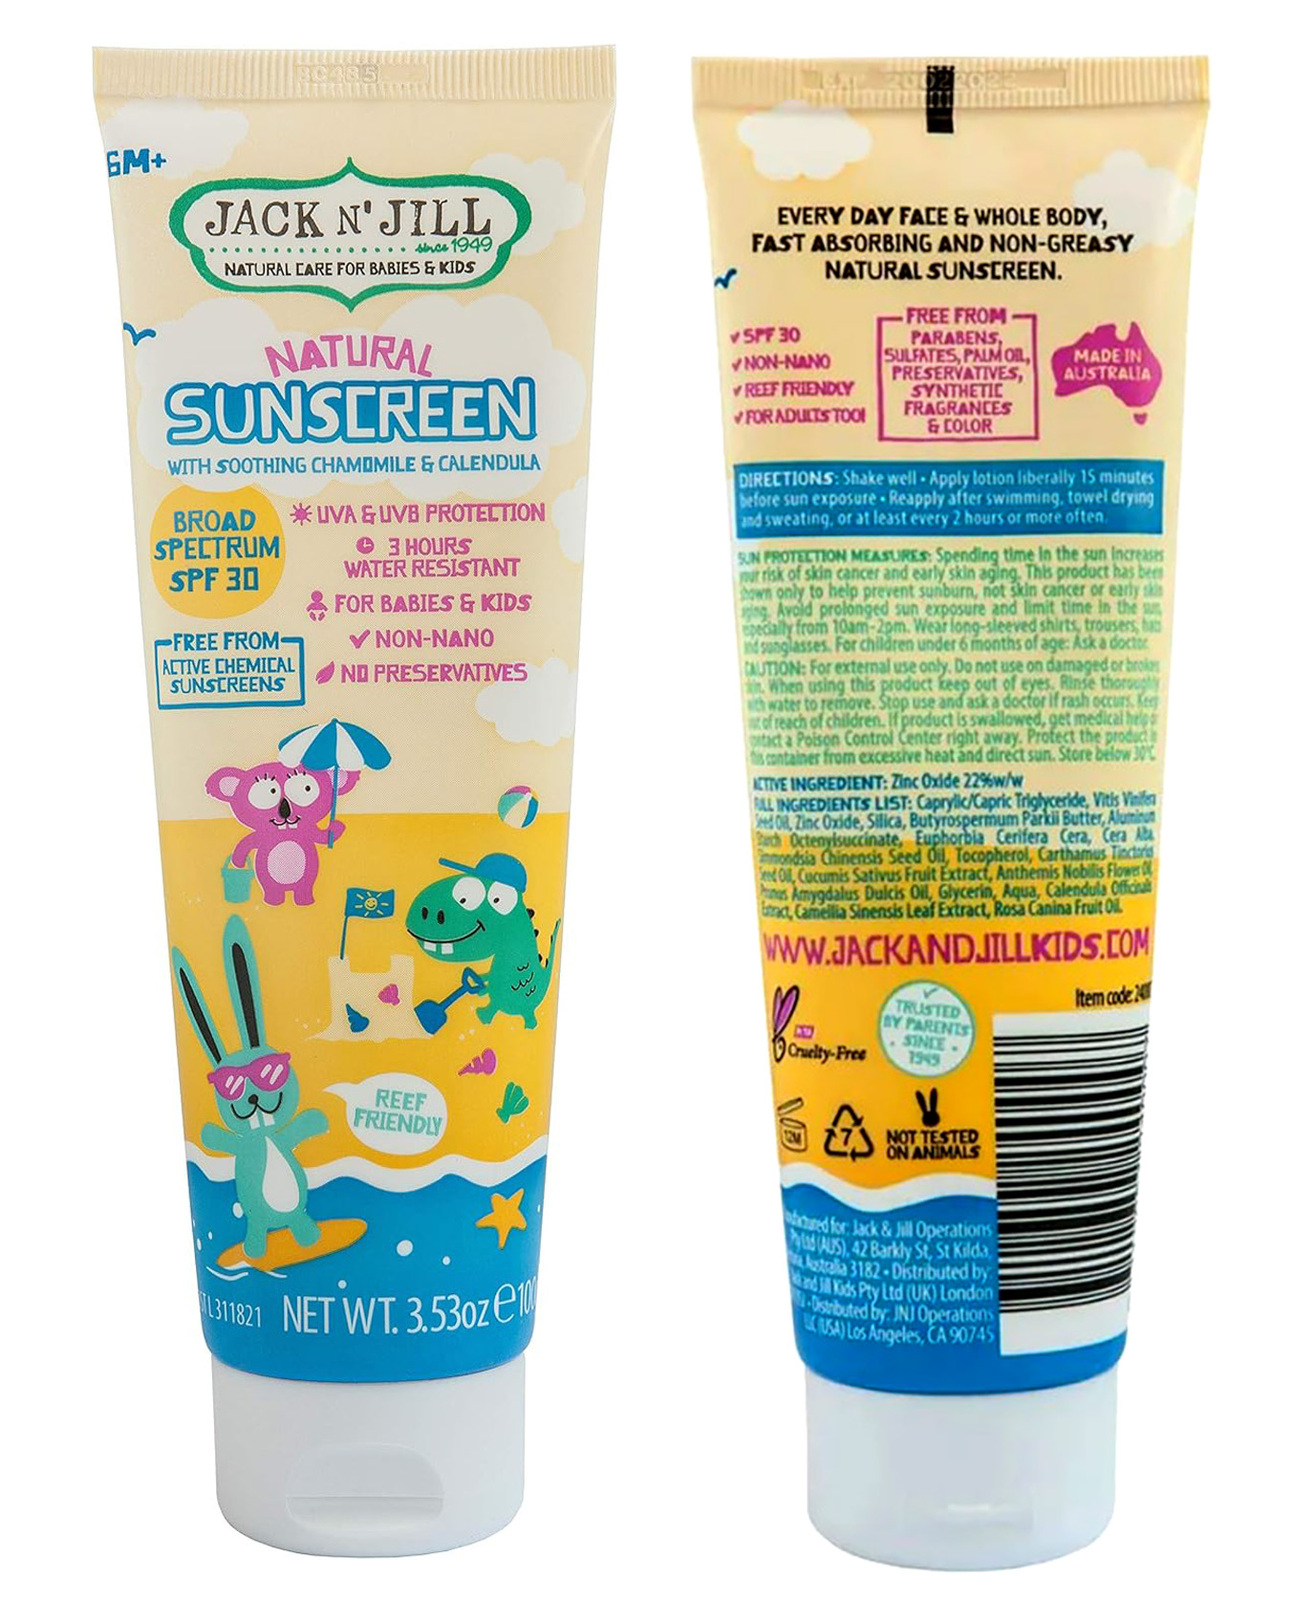 Two Tubes of Jack N'Jill SPF 30 Natural Sunscreen, showcasing its child-friendly formula with chamomile and calendula extracts, perfect for infants and children